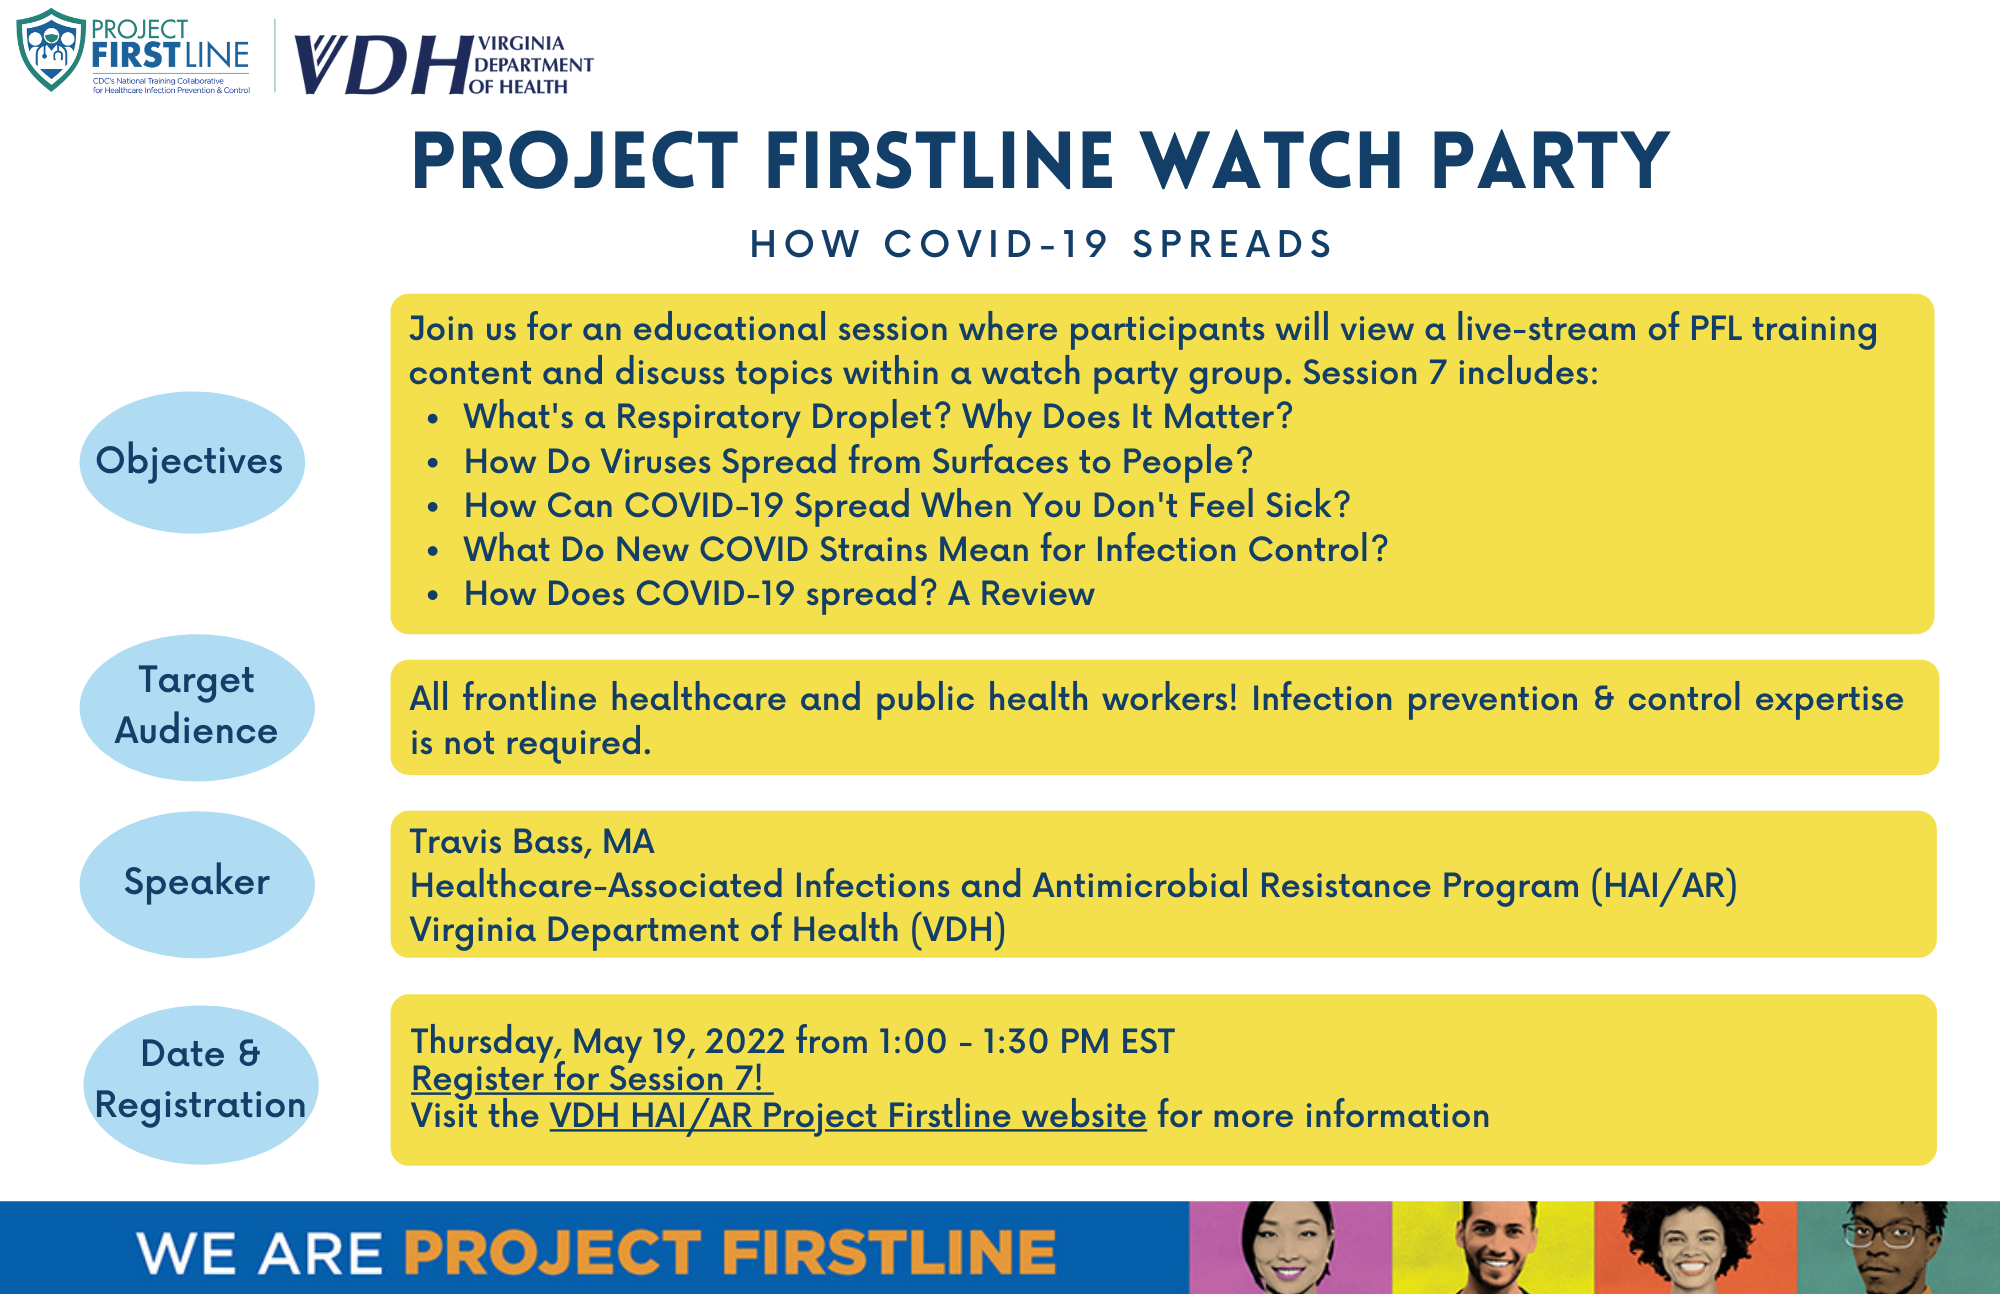 Project Firstline Watch Party Session 7